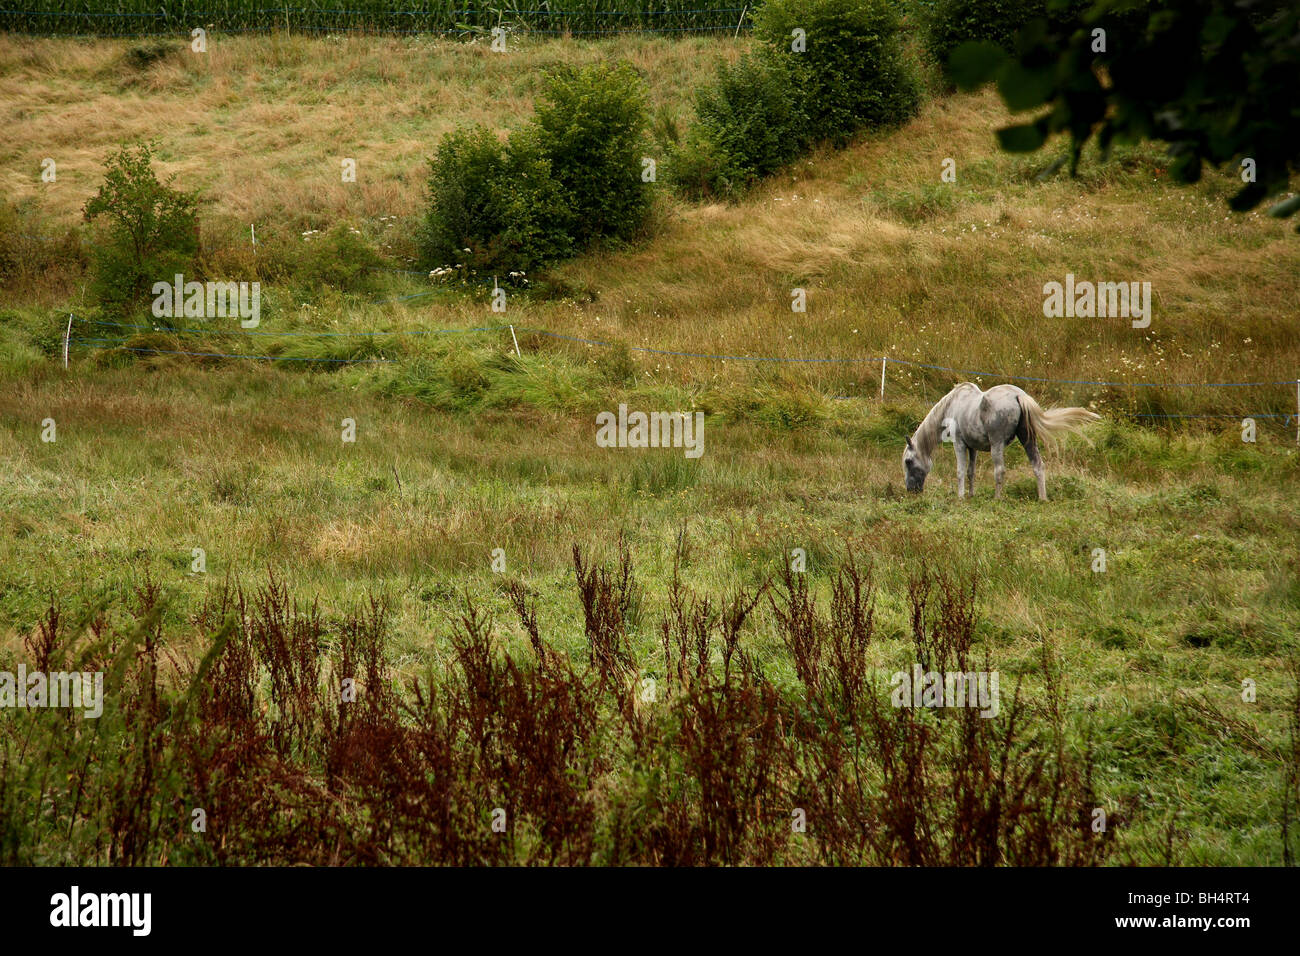 A grey horse in a large field. Stock Photo